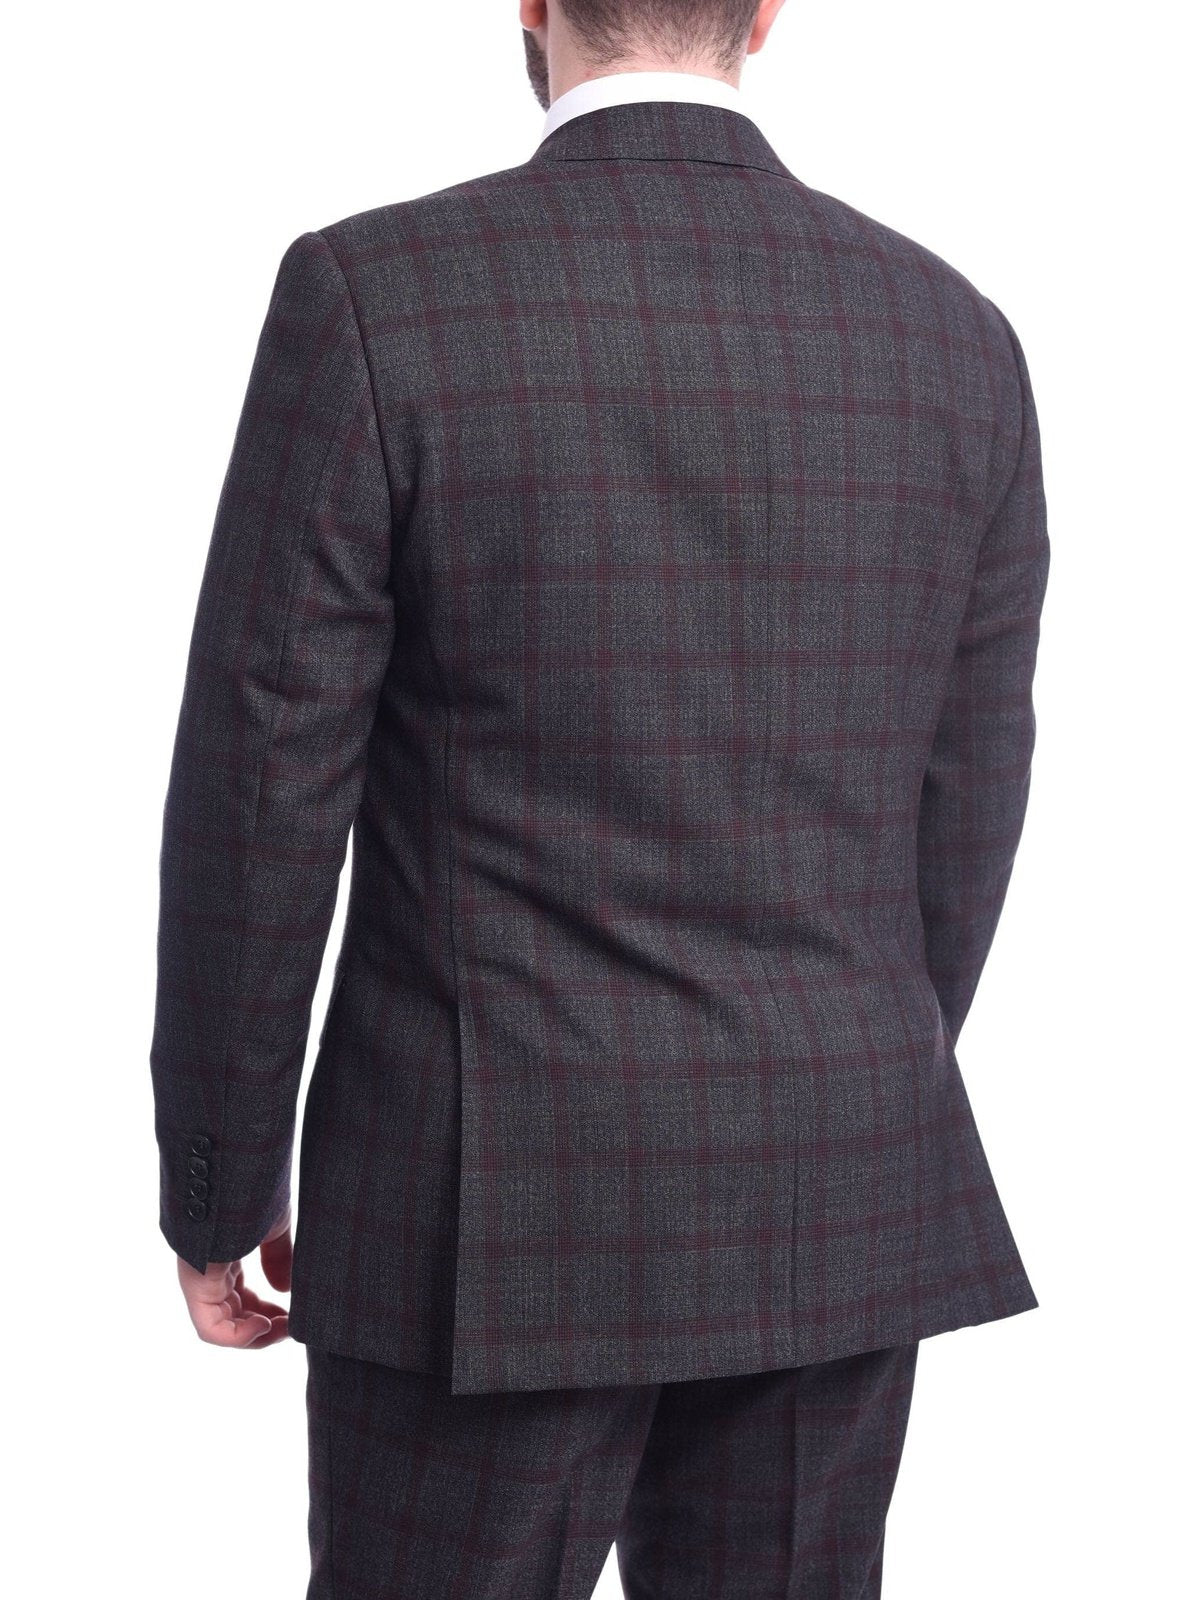 Napoli Sale Suits Napoli Classic Fit Gray & Red Glen Plaid Half Canvassed Super 150s Wool Suit